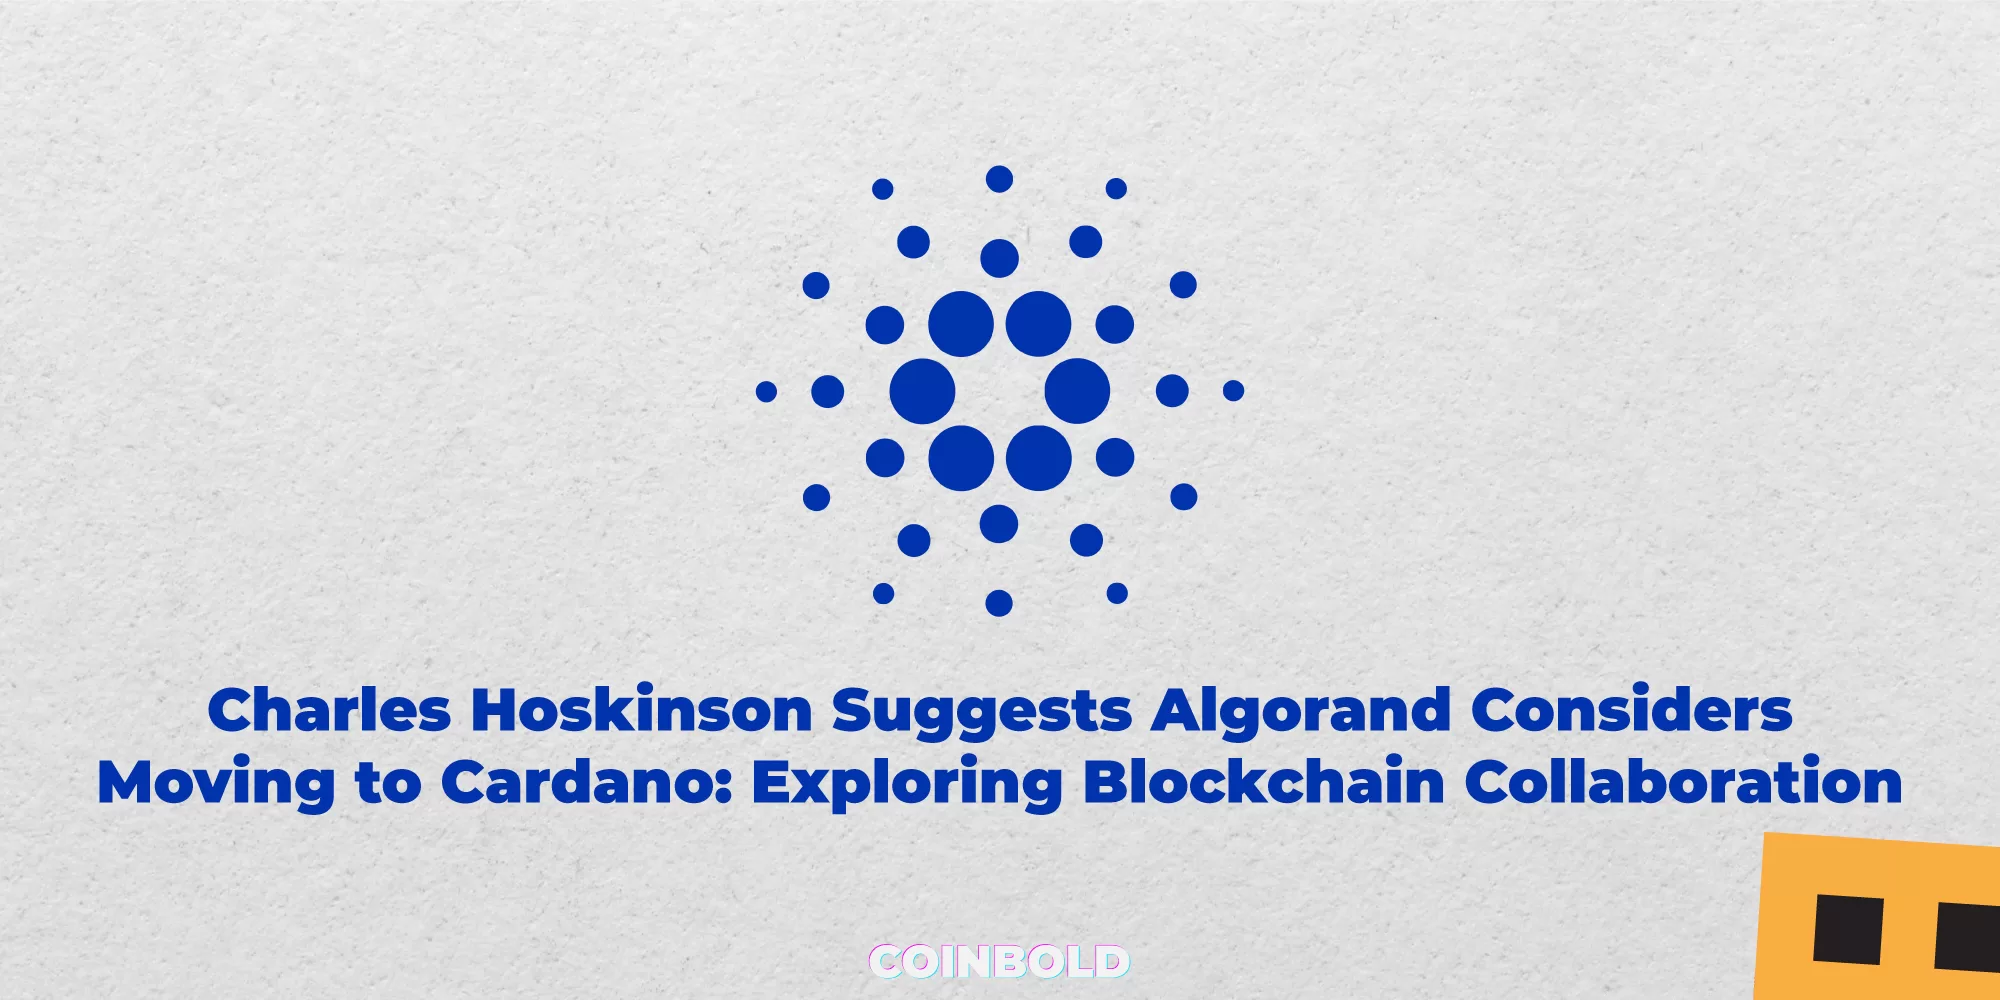 Charles Hoskinson Suggests Algorand Considers Moving to Cardano: Exploring Blockchain Collaboration